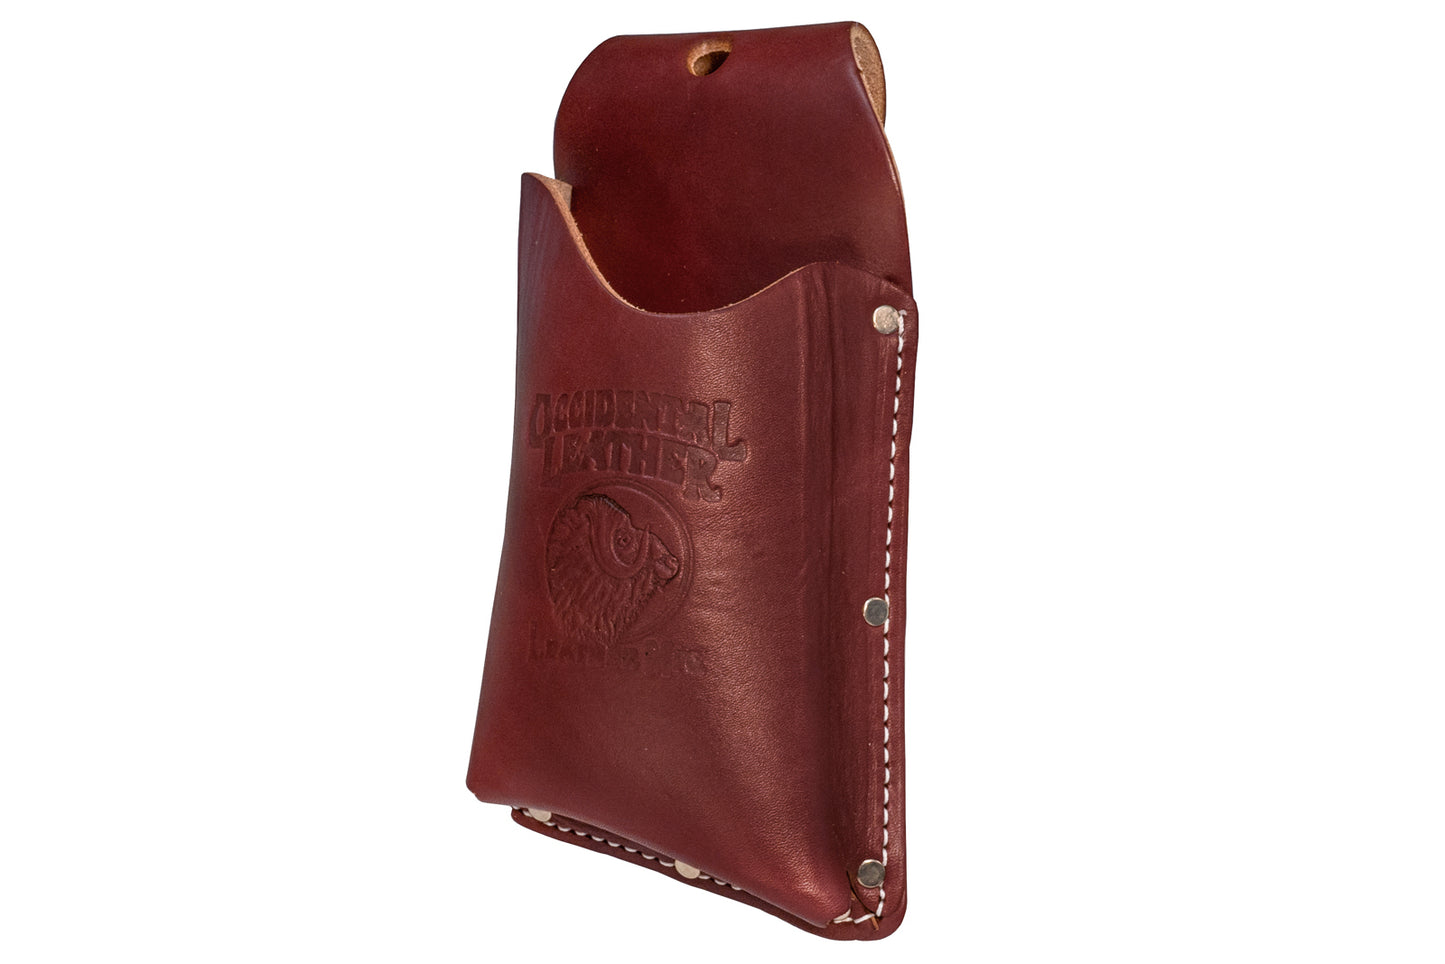 Occidental Leather Nail Strip Holder - Model 5545 - Fits up to a 3" work belt - Leather Strip Holster - Riveted Hand Made - 759244177305 - Occidental Leather's belt worn nail strip holster accepts nail strips up to 16D size for nail guns. Constructed of heavy belting leather. Inside dimensions: 3-1/2" x 6-1/4" 